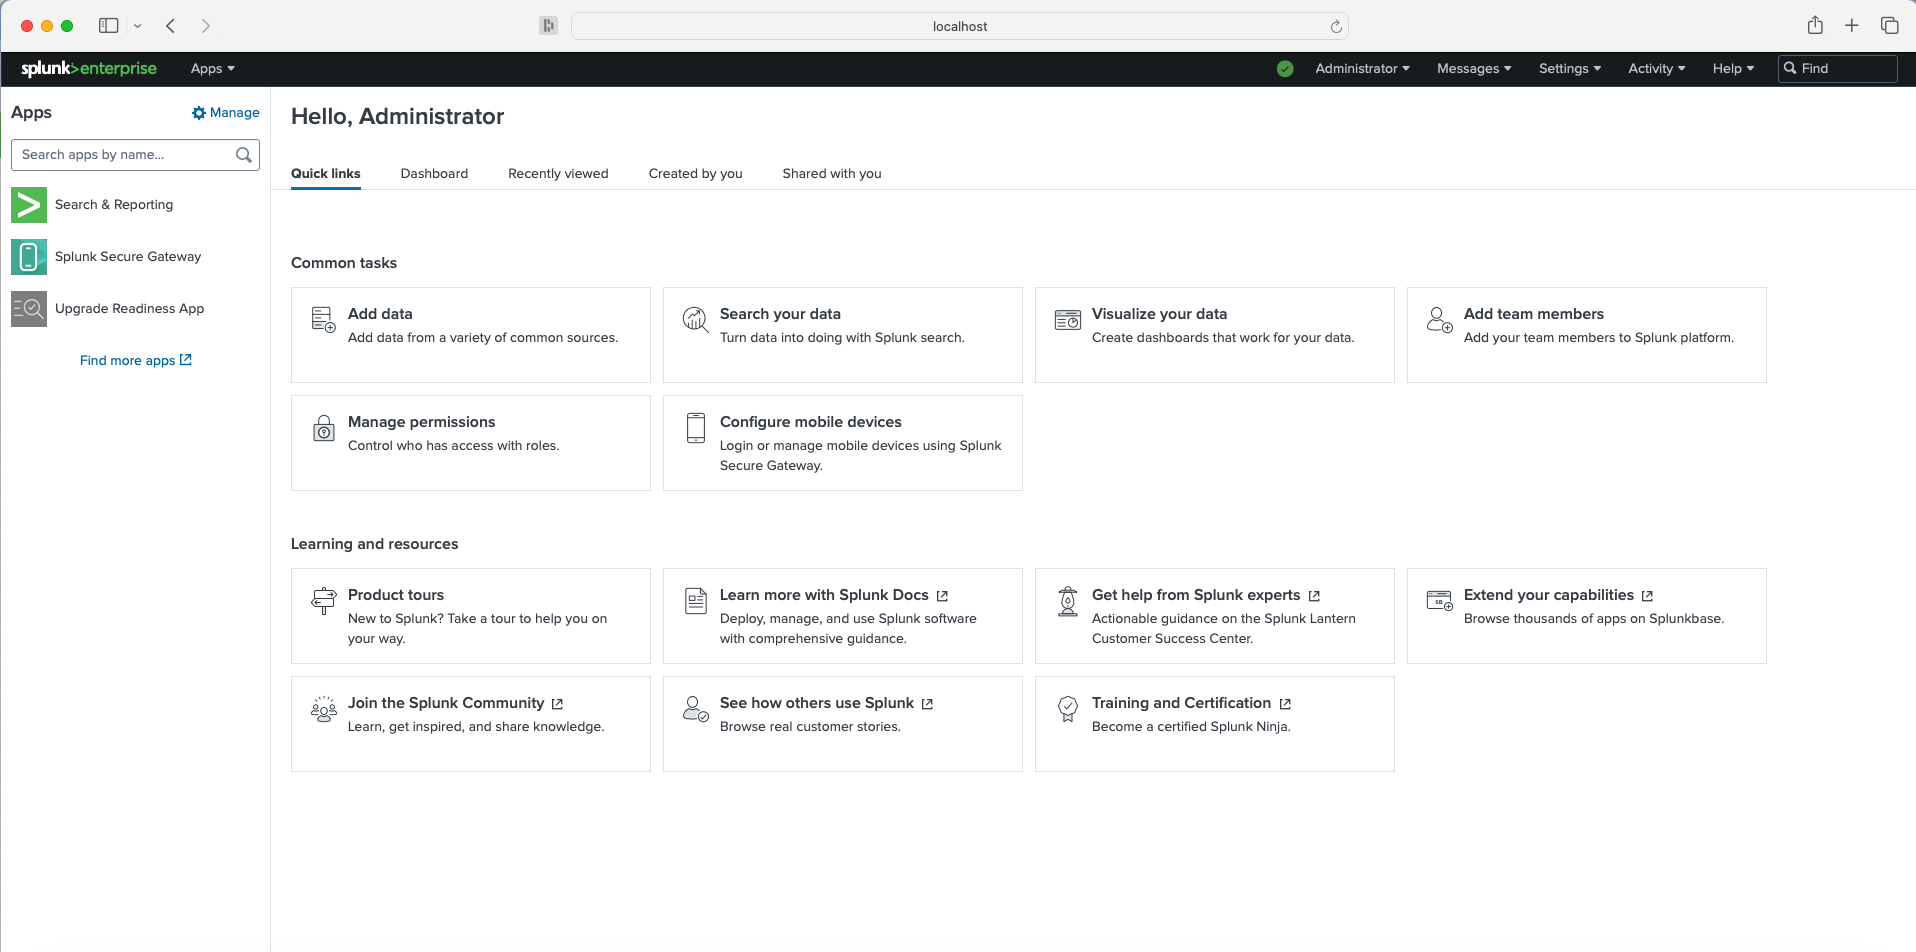 Splunk Enterprise main console screen displaying options for apps, quick links, common tasks, and learning resources for the administrator.